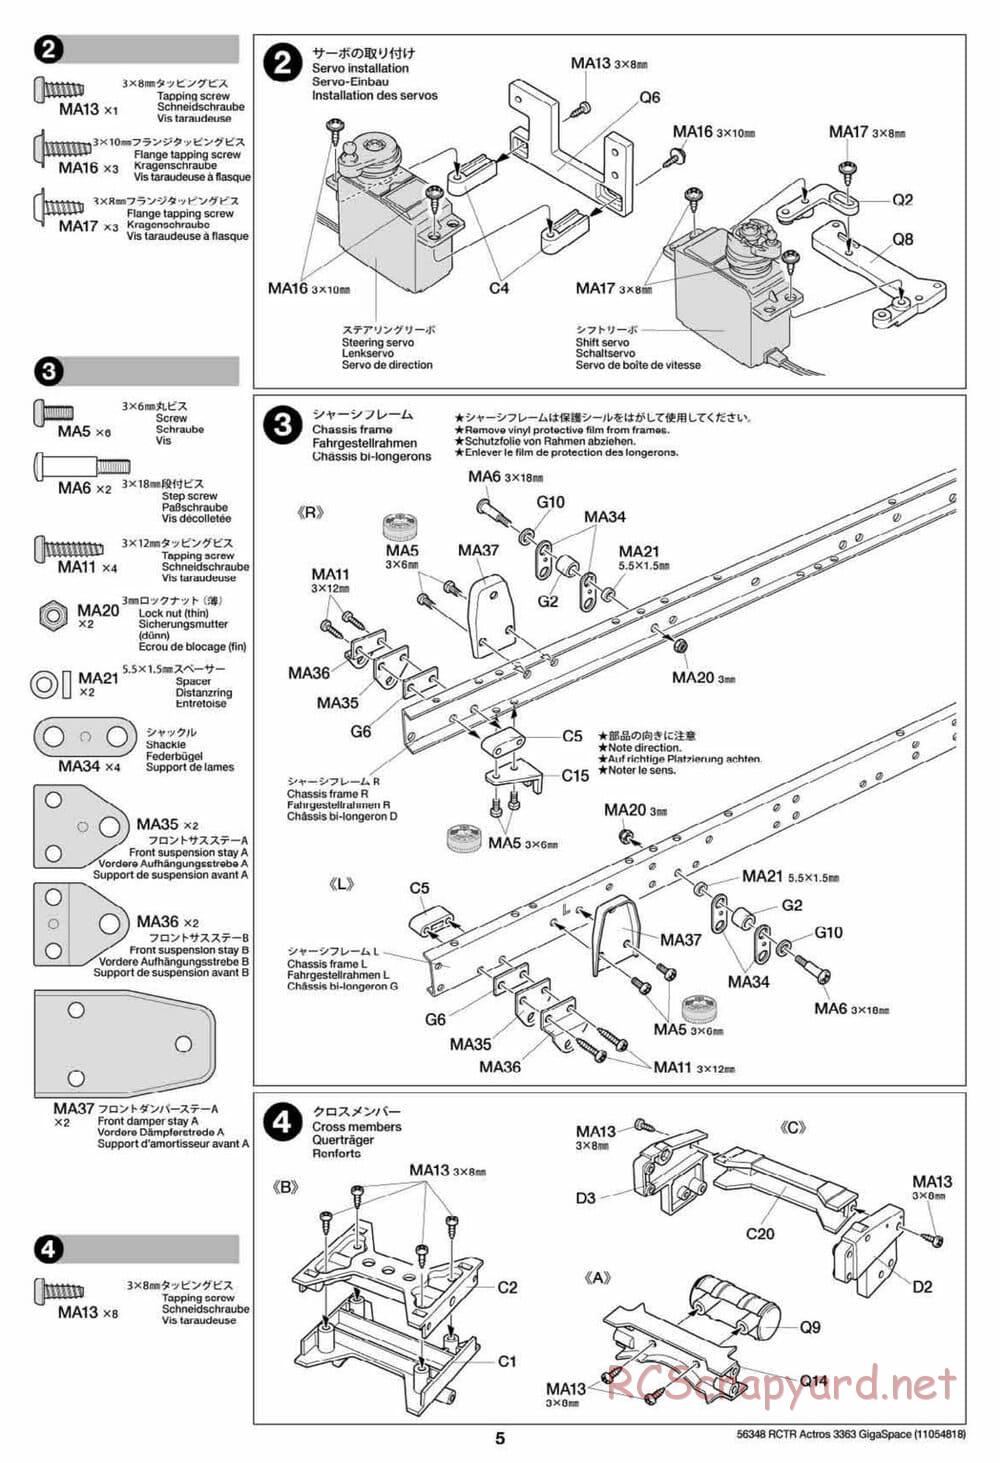 Tamiya - Mercedes-Benz Actros 3363 6x4 GigaSpace Tractor Truck Chassis - Manual - Page 5